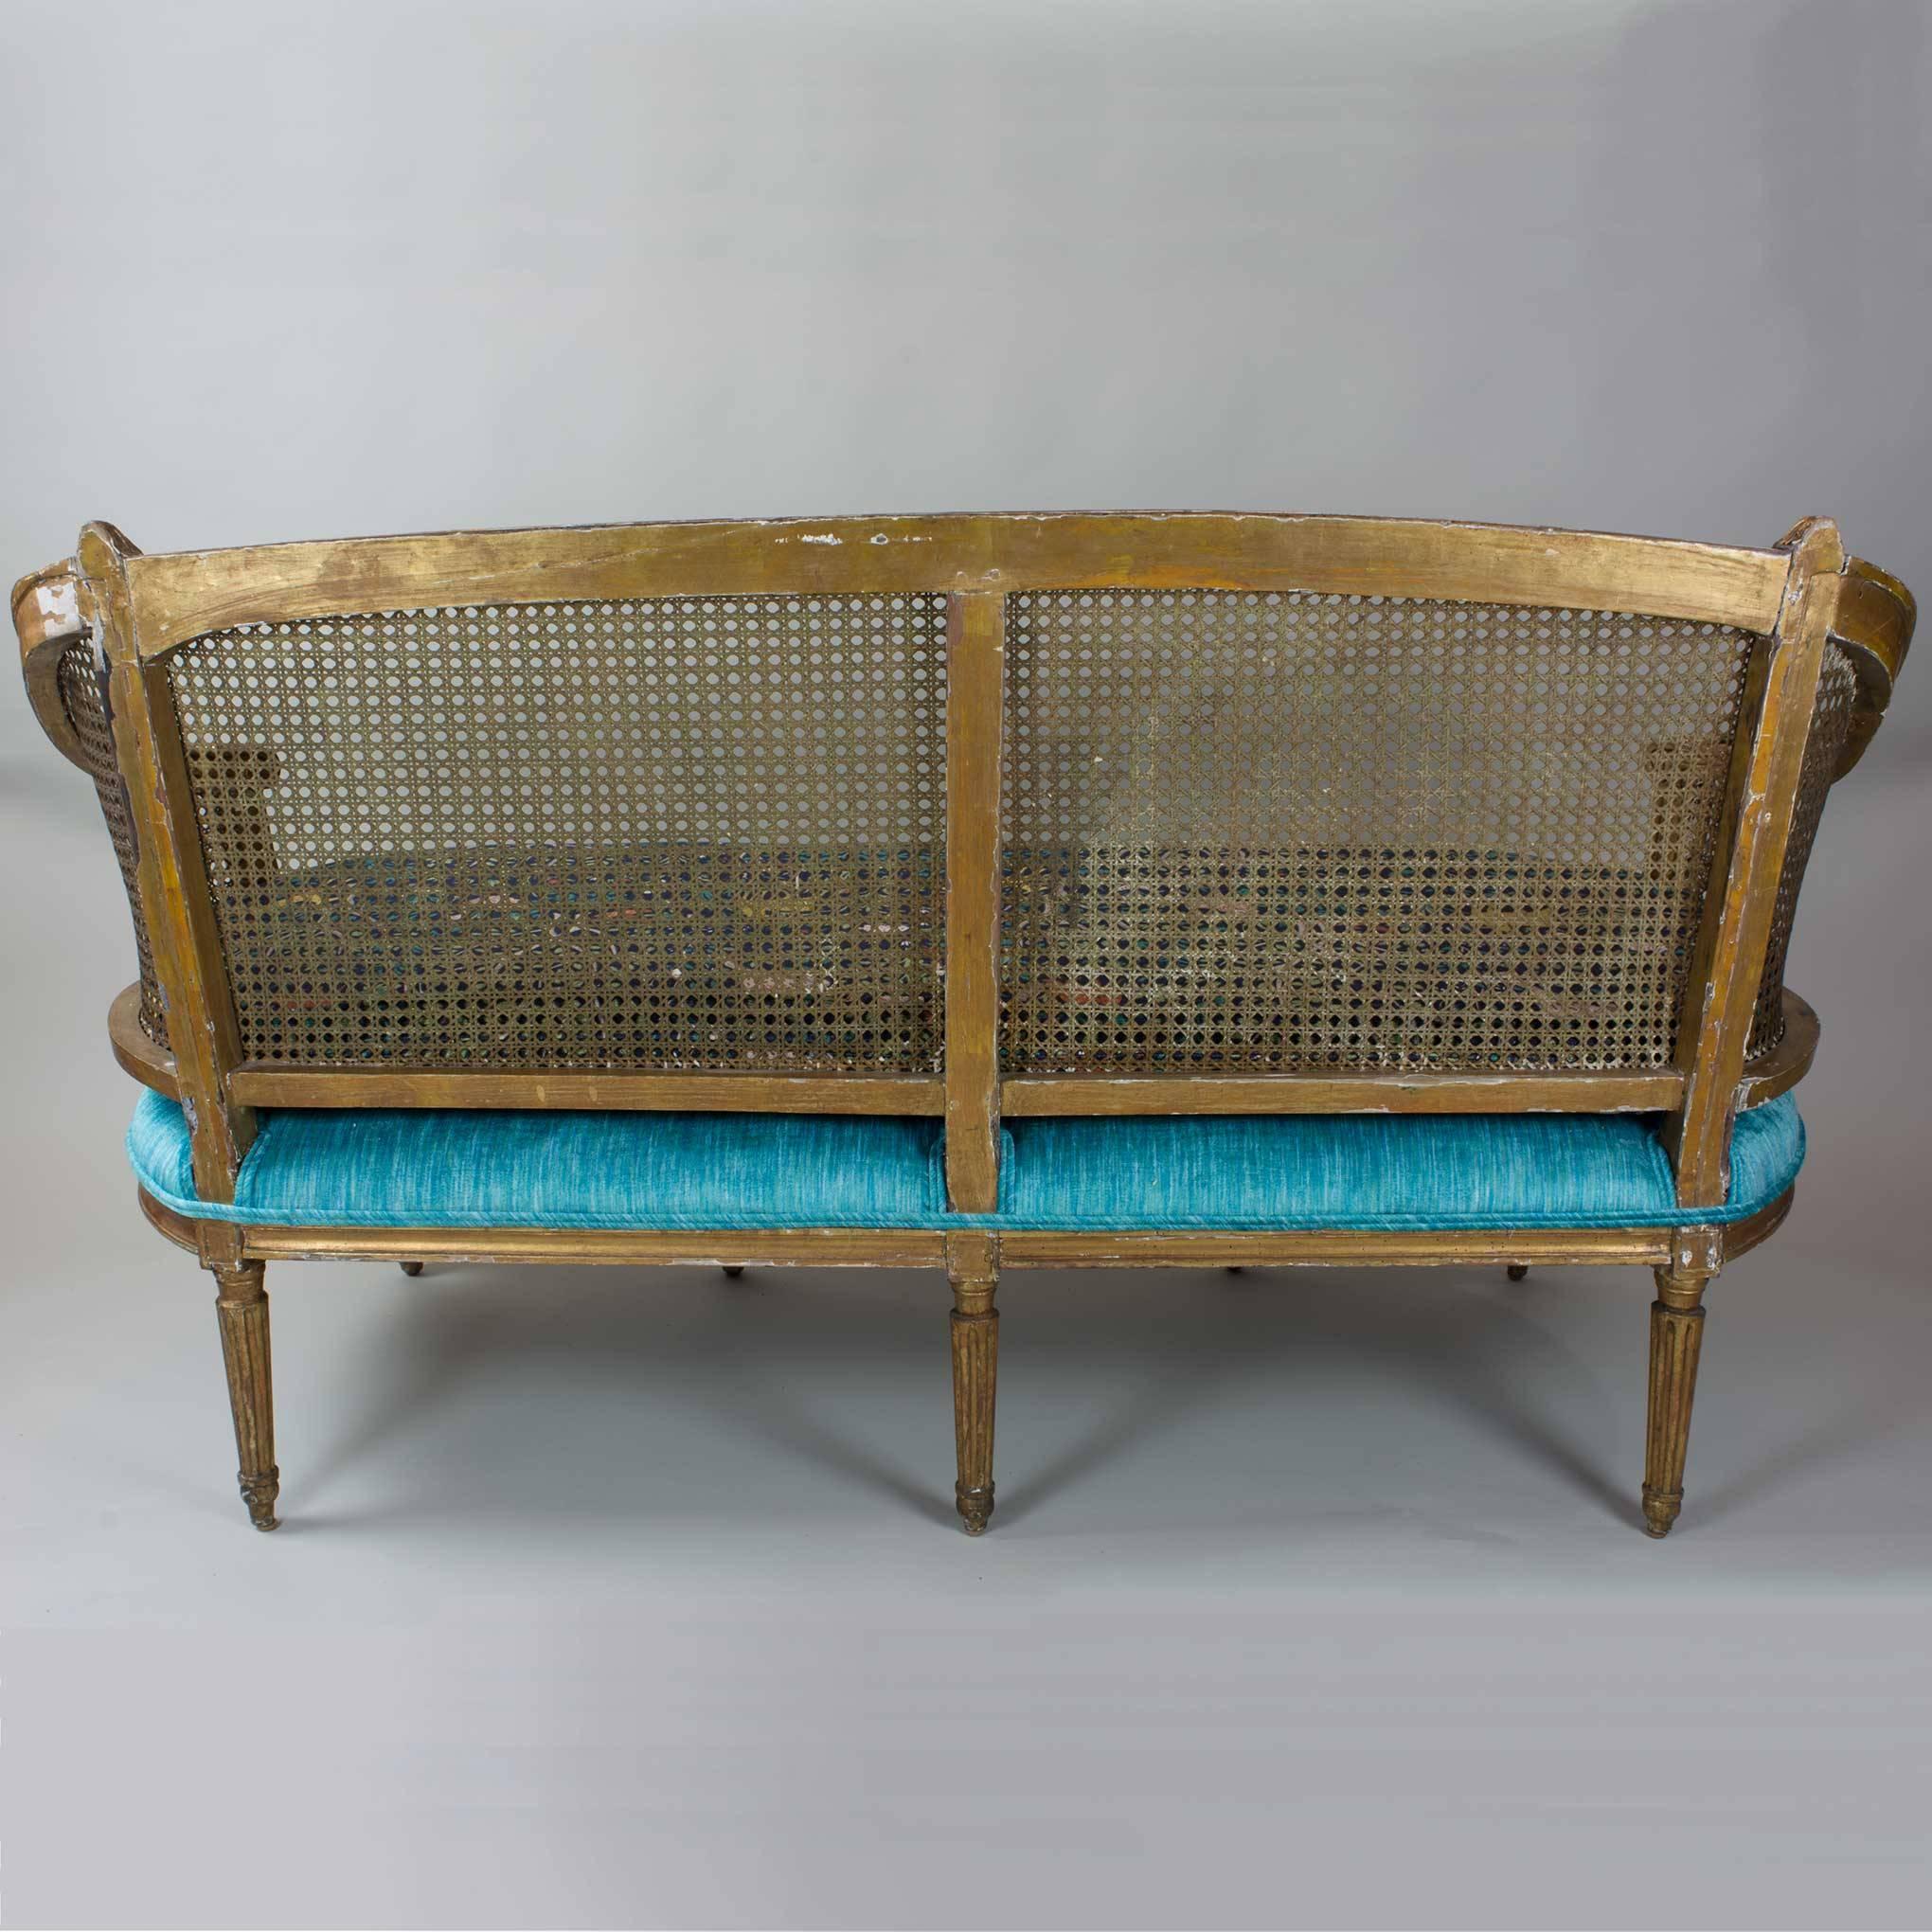 Contemporaries of Louis XVI and Marie Antoinette may once have perched upon this lovely old settee dating from 1780. Surely an inviting place of repose for a busy socialite centuries ago, it gently shows its age today, yet maintains its natural